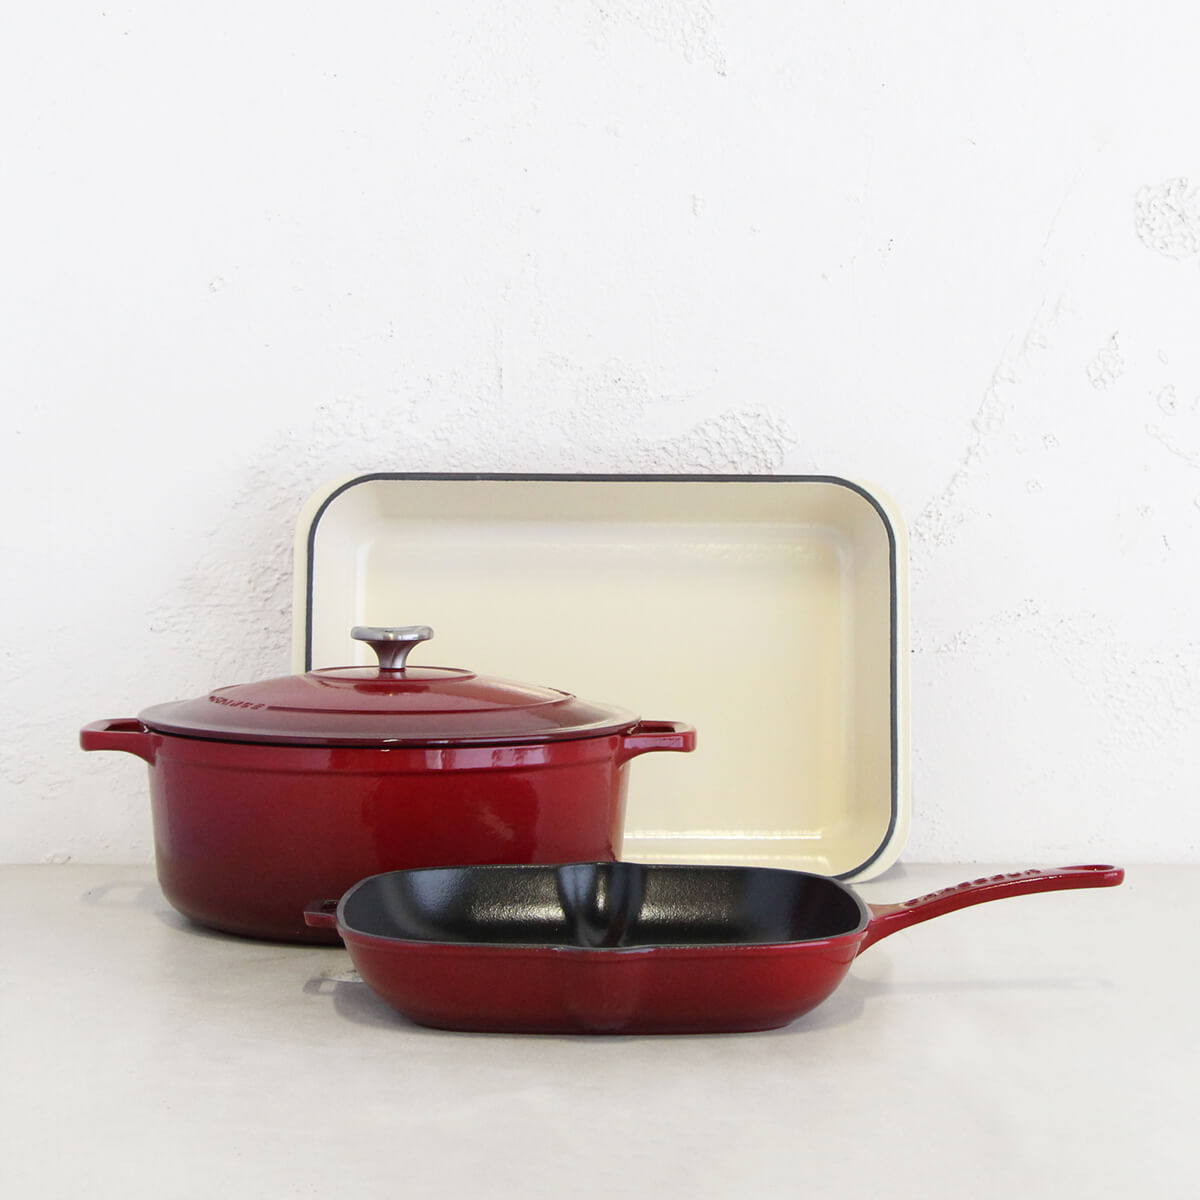 Chasseur - French Oven (Cast Iron Enamel)